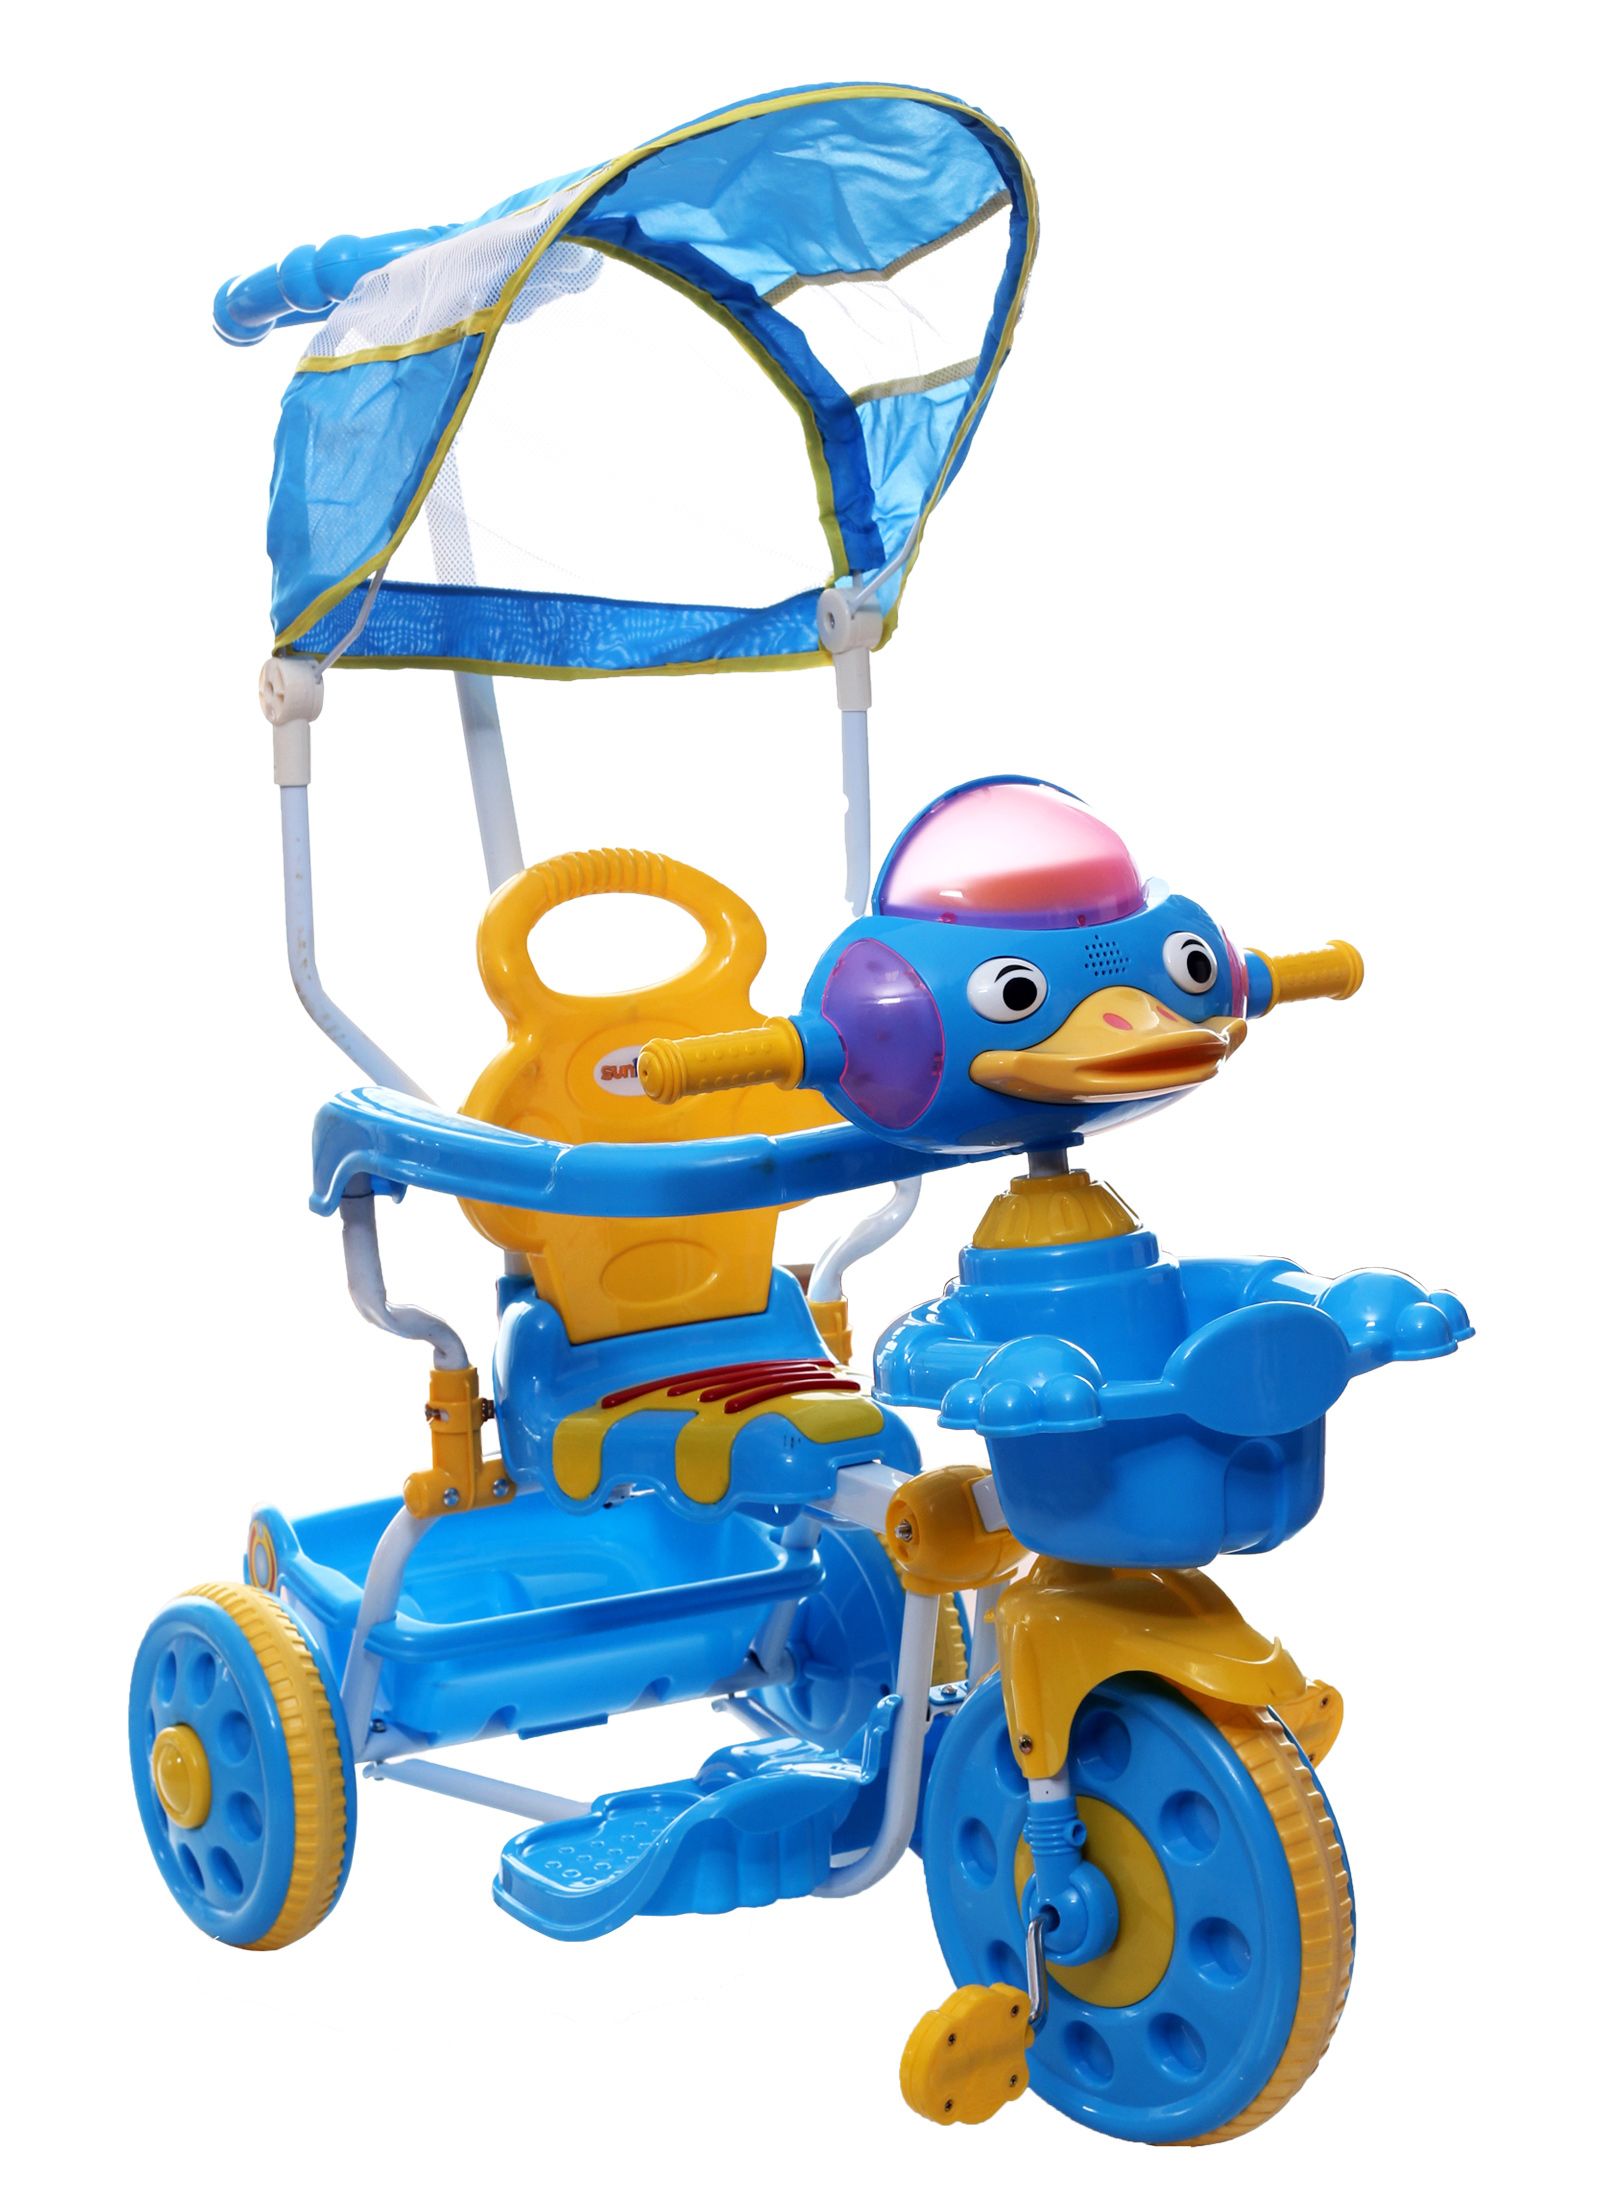 Sunbaby Tricycle - Blue